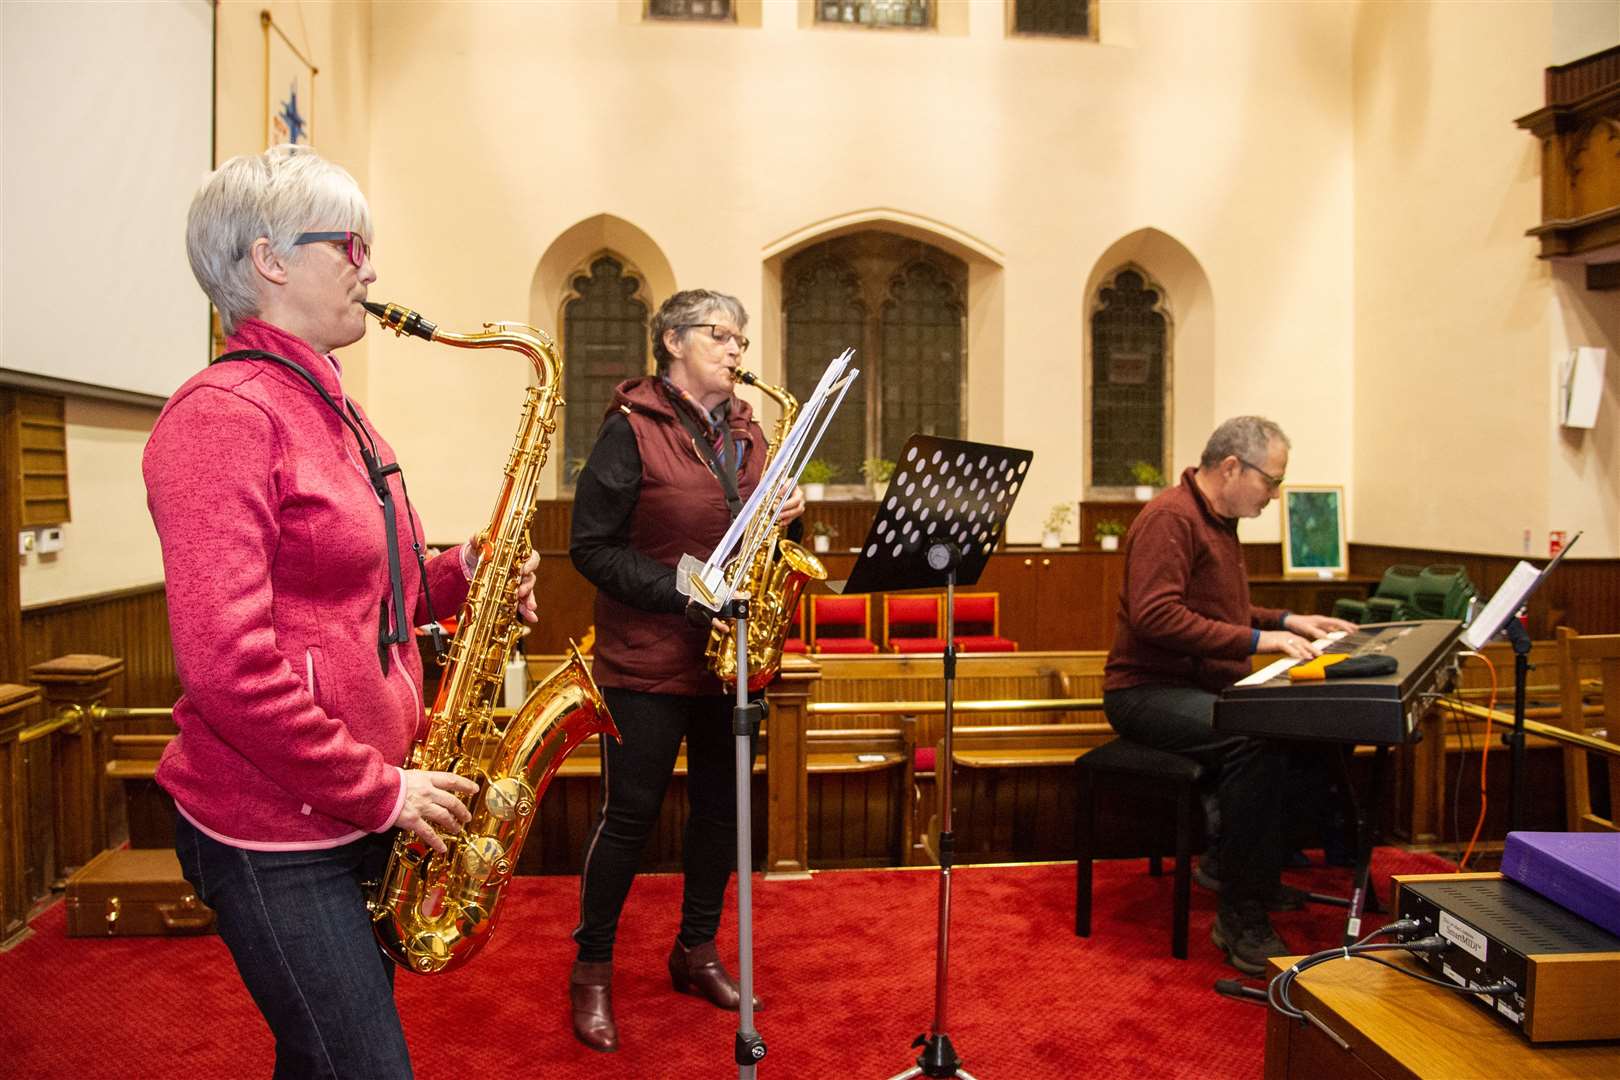 Linda Ross, Lorna Creswell and Chris Neal rehearsing ahead of the modern church service. Picture: Daniel Forsyth